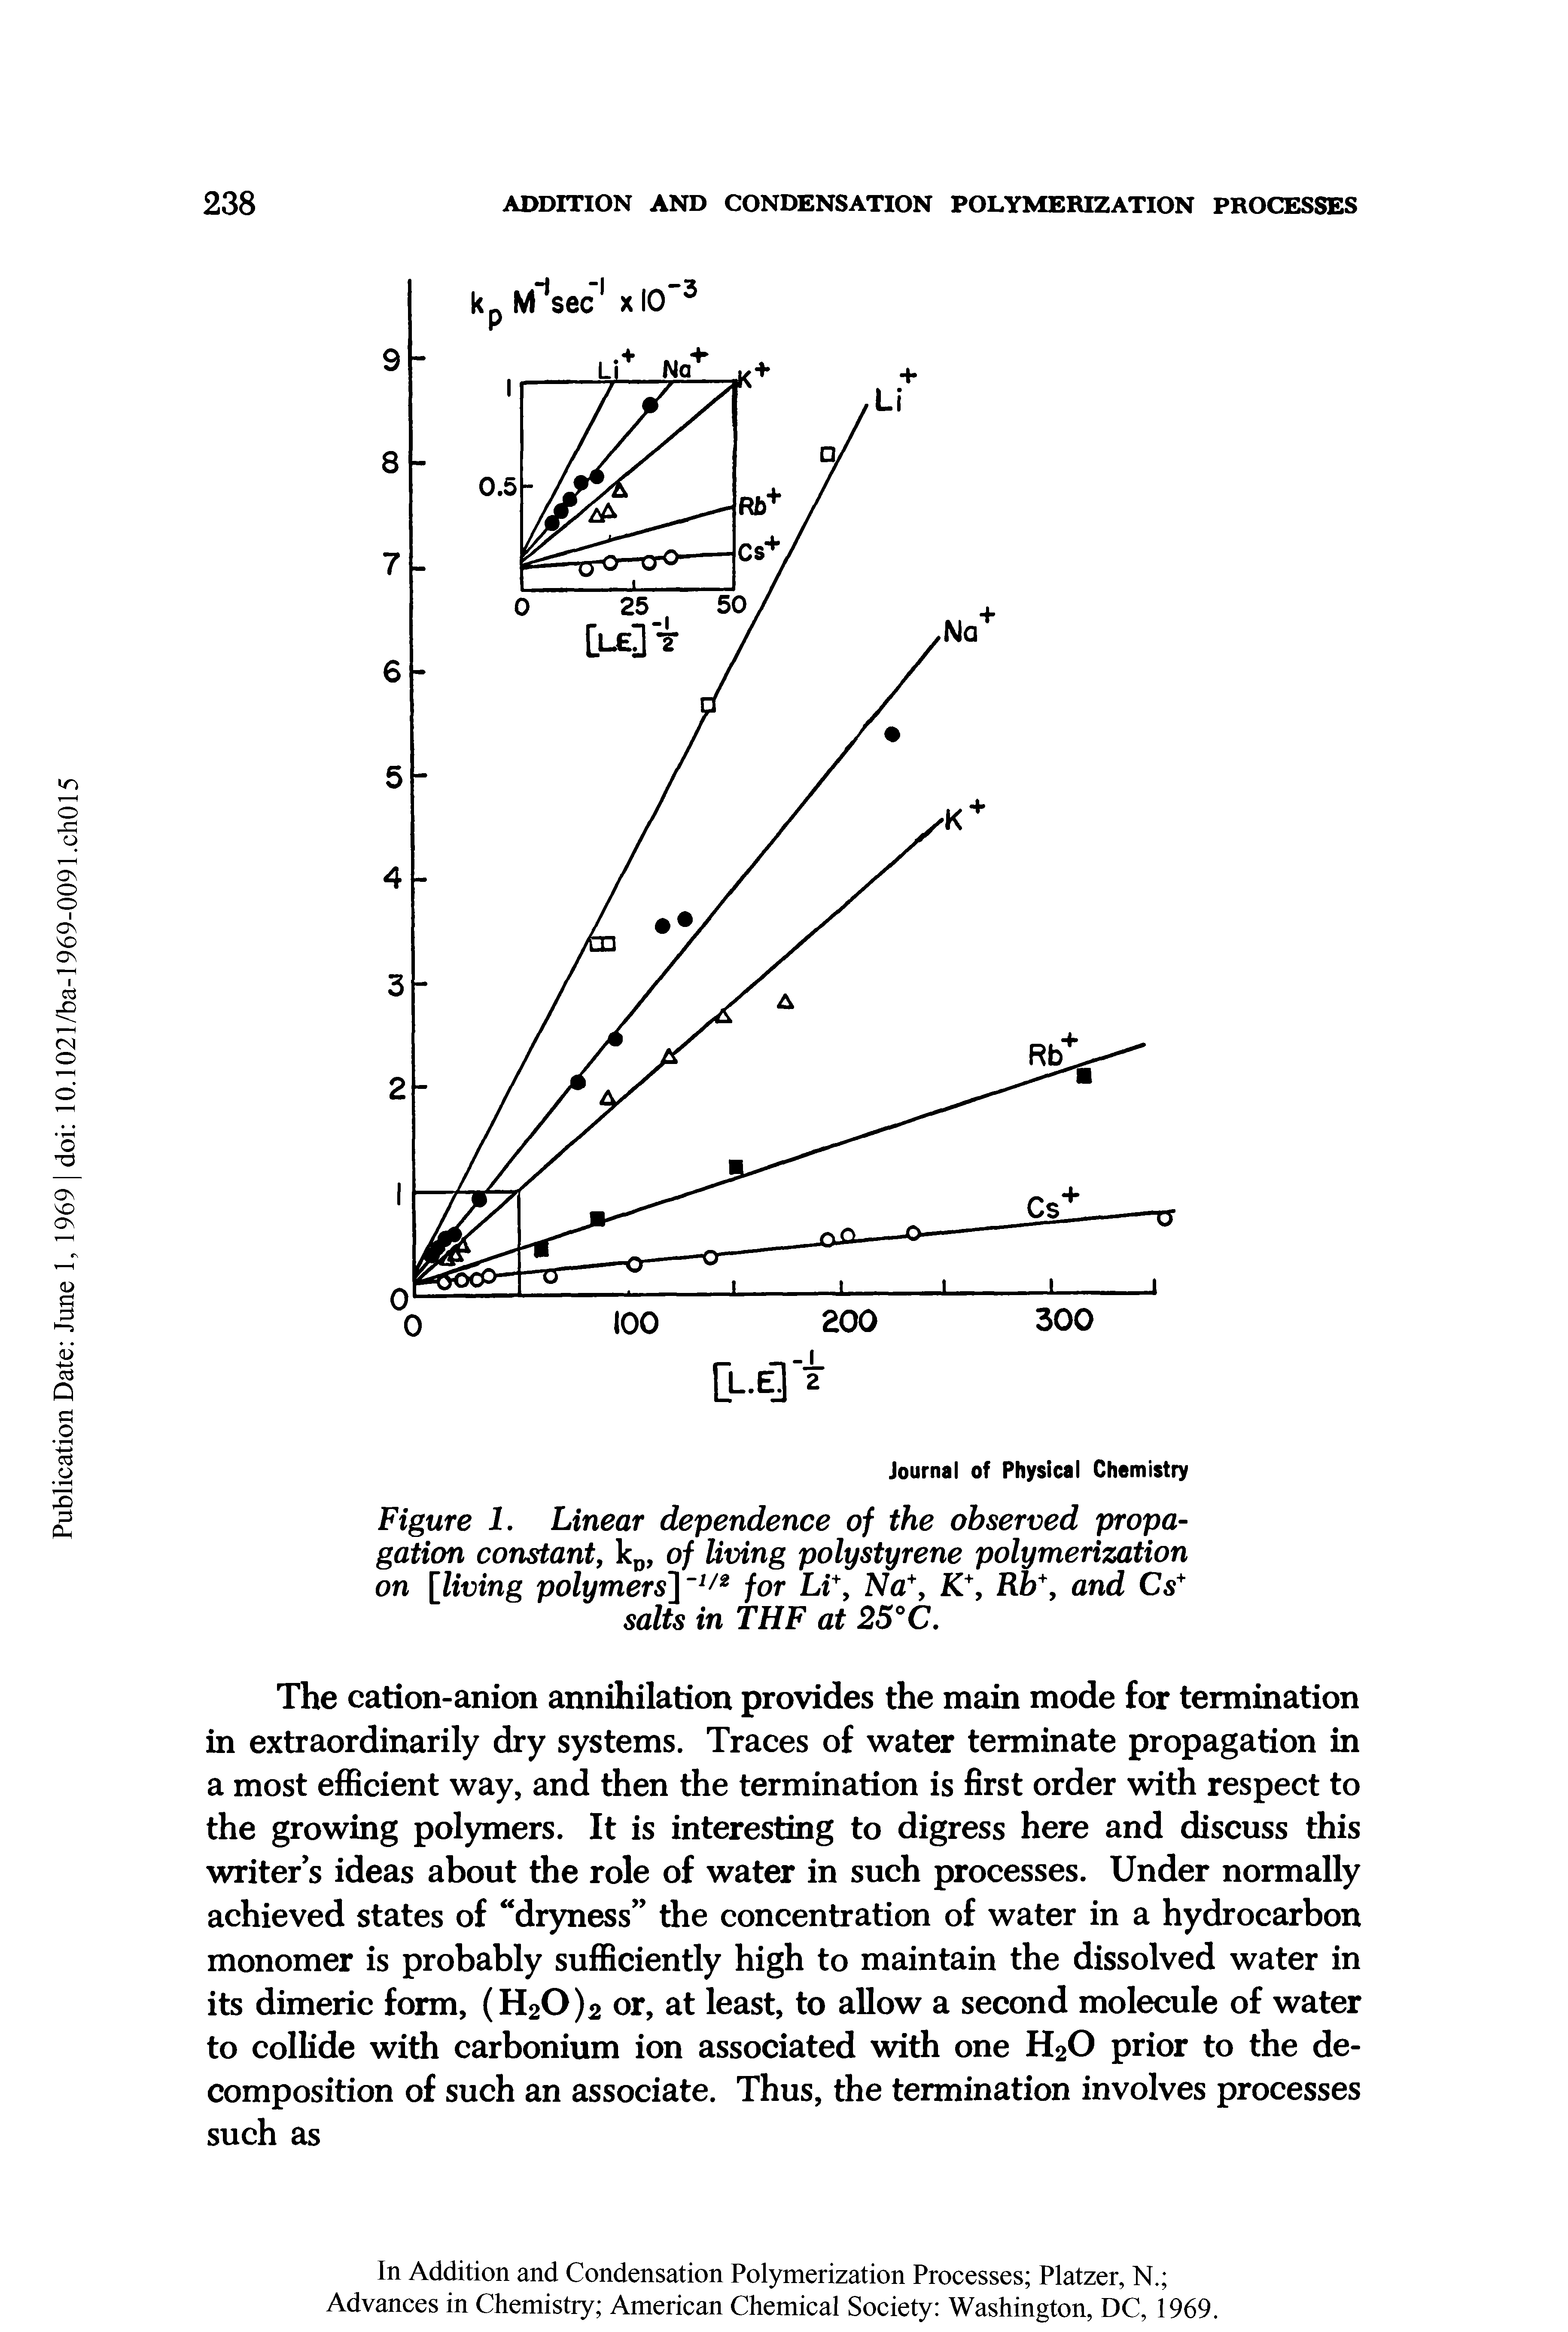 Figure 1. Linear dependence of the observed propagation constant, kD, of living polystyrene polymerization on [living polymers] 11 for Li+y Na+, K+, Rb+, and Cs+ salts in THF at 25°C.